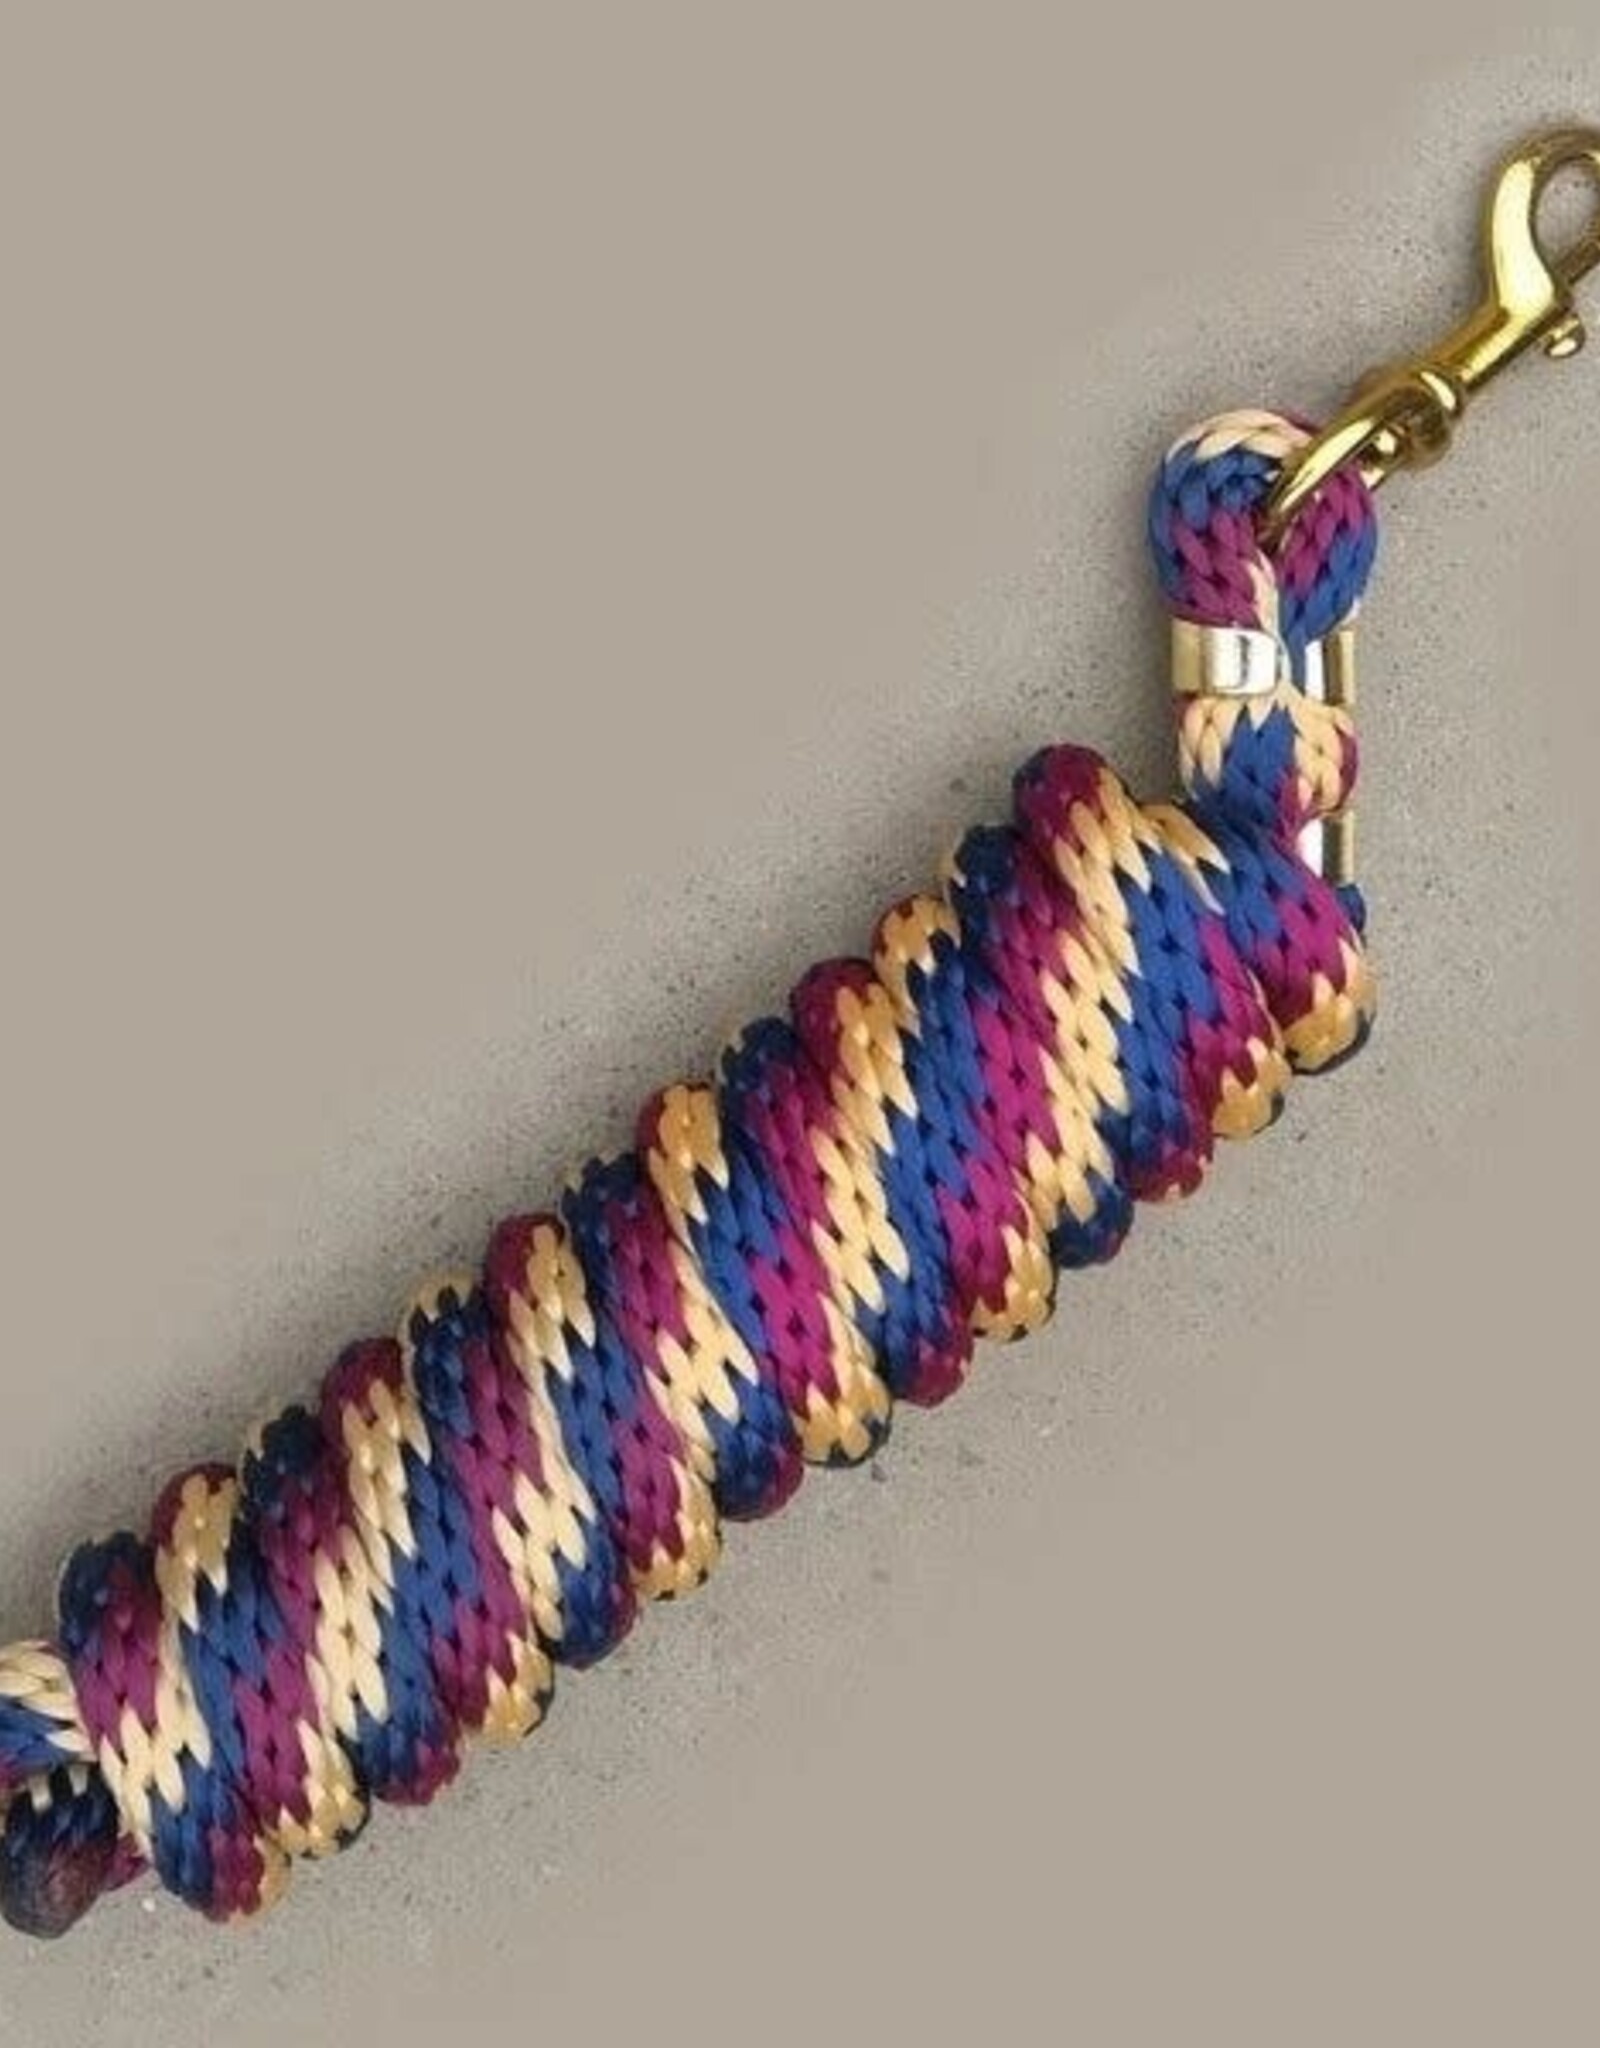 Epic Lead Rope 5/8' x 9"